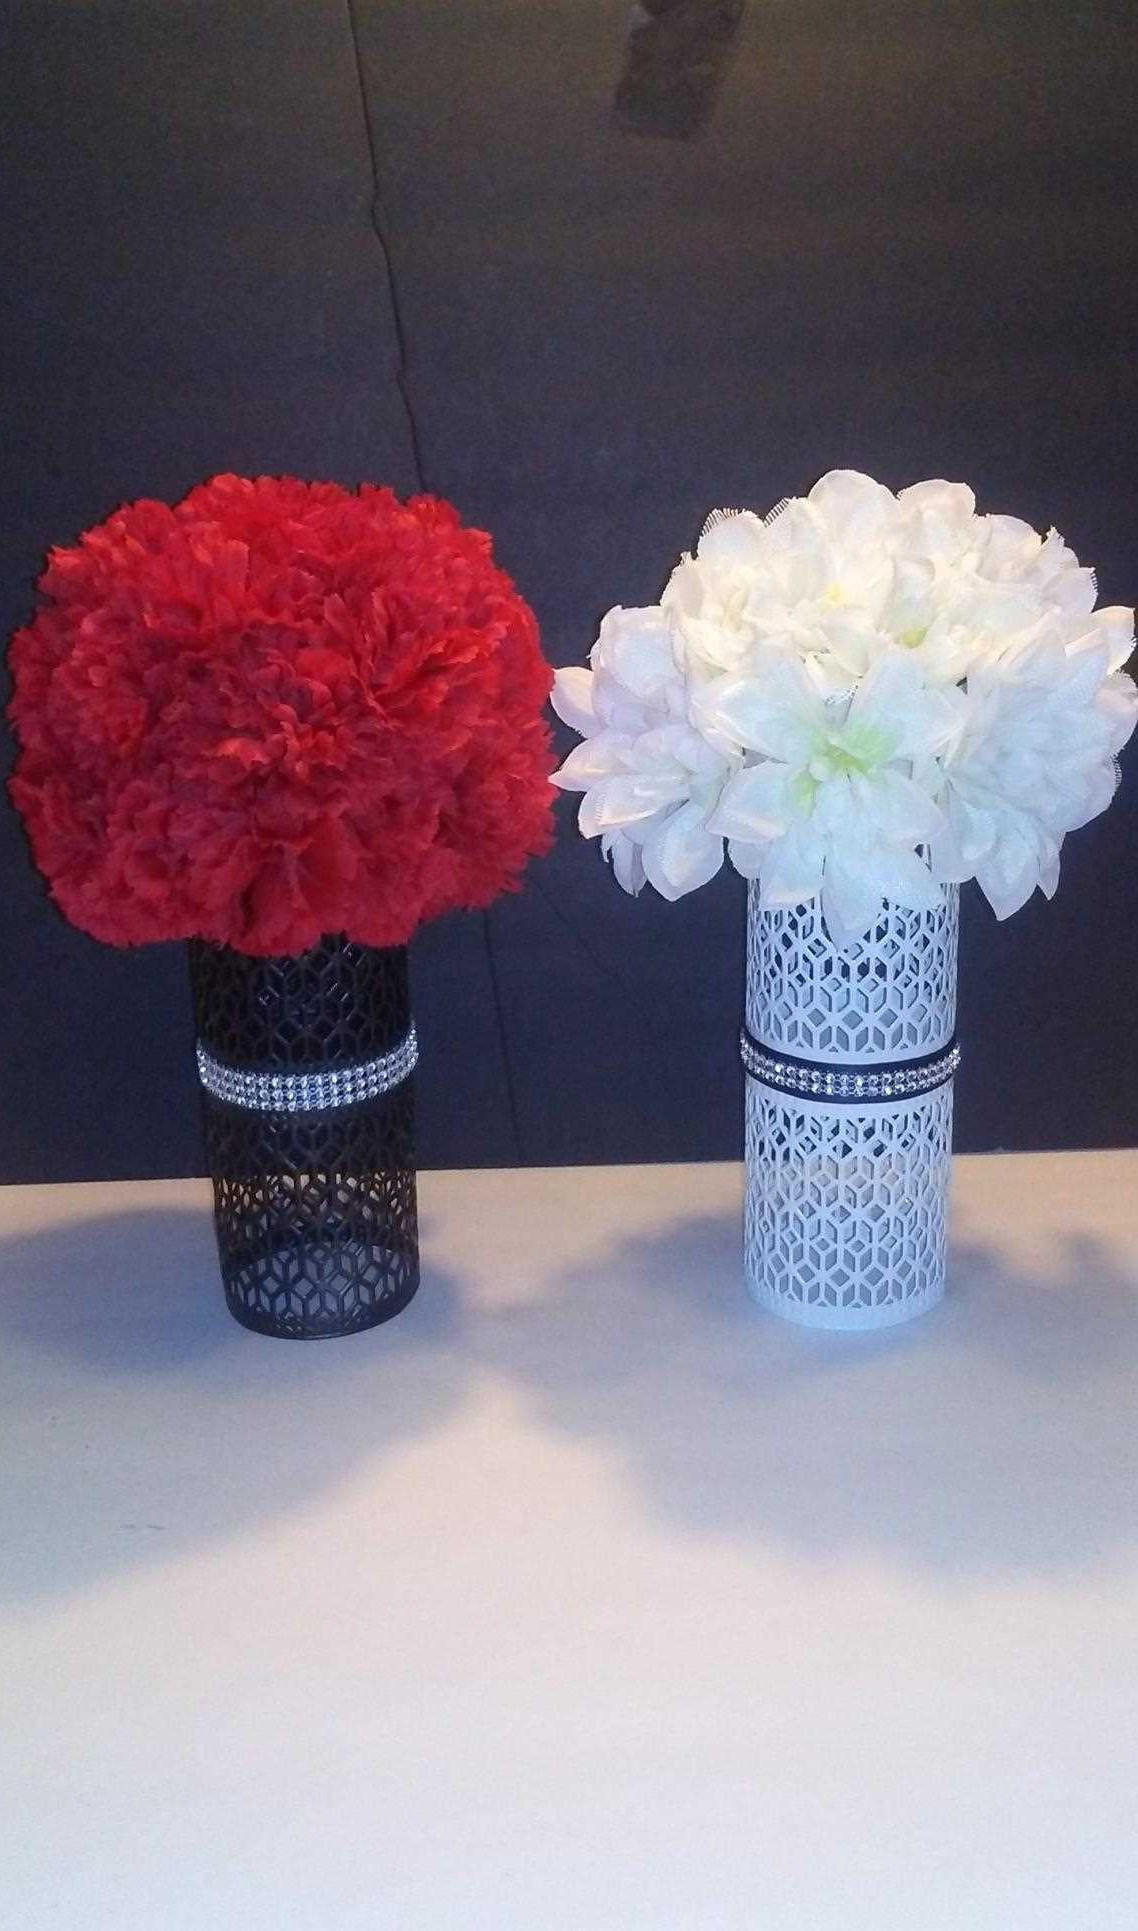 29 Spectacular Cheap Square Vases In Bulk 2024 free download cheap square vases in bulk of 26 luxury wedding centerpieces ideas sokitchenlv throughout wedding centerpieces ideas amazing dollar tree wedding decorations awesome h vases dollar vase i 0d 